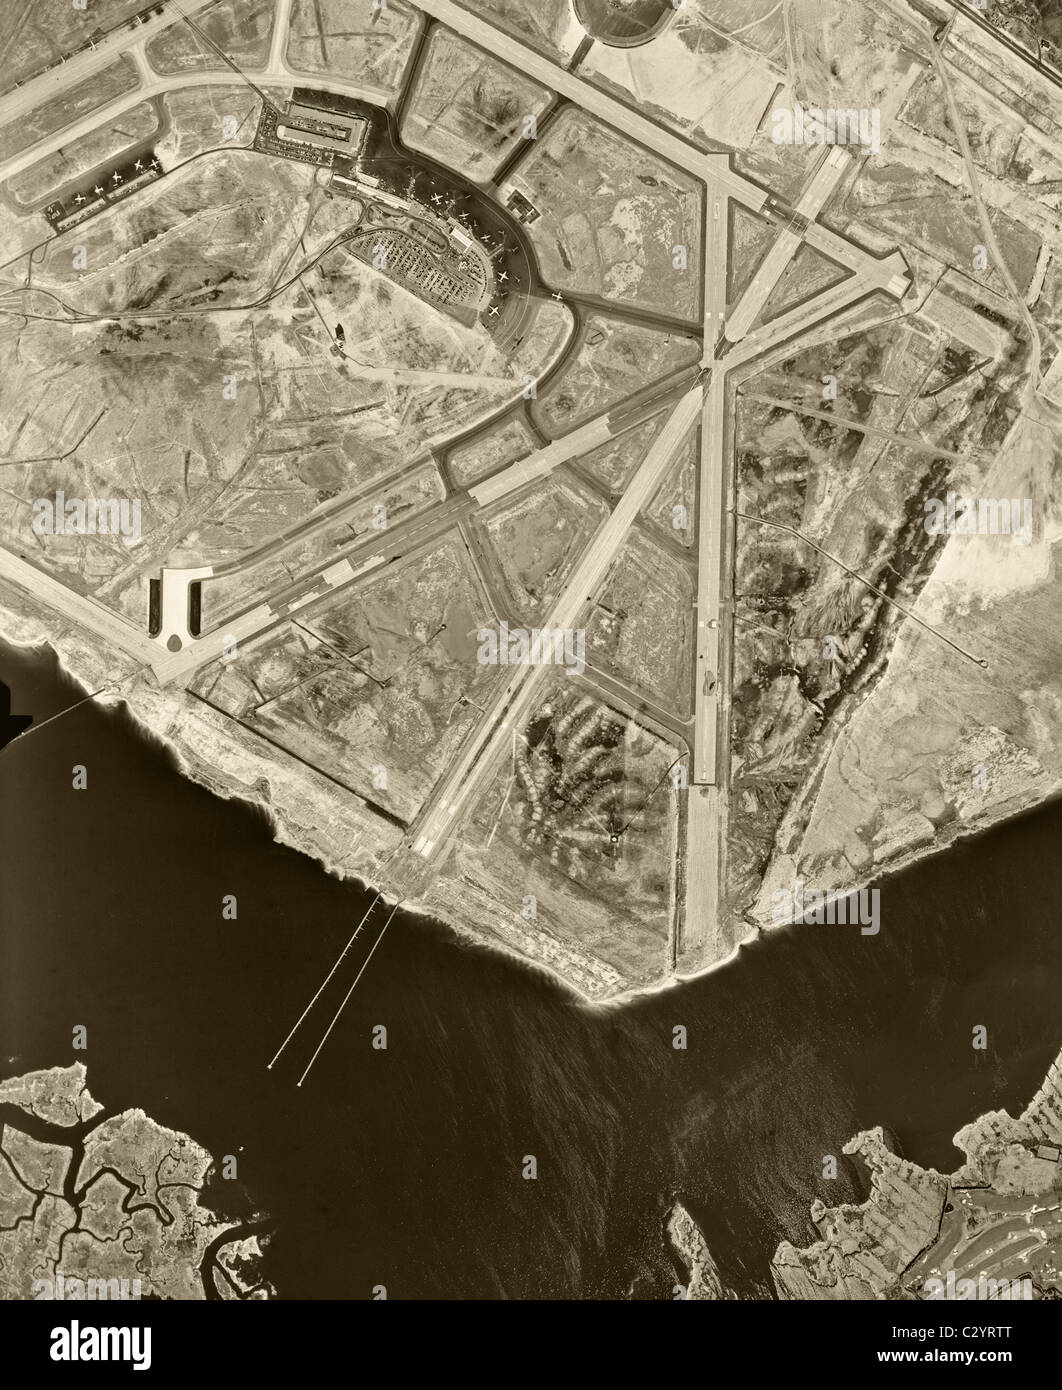 Historical Aerial Photograph Of John F Kennedy International Airport